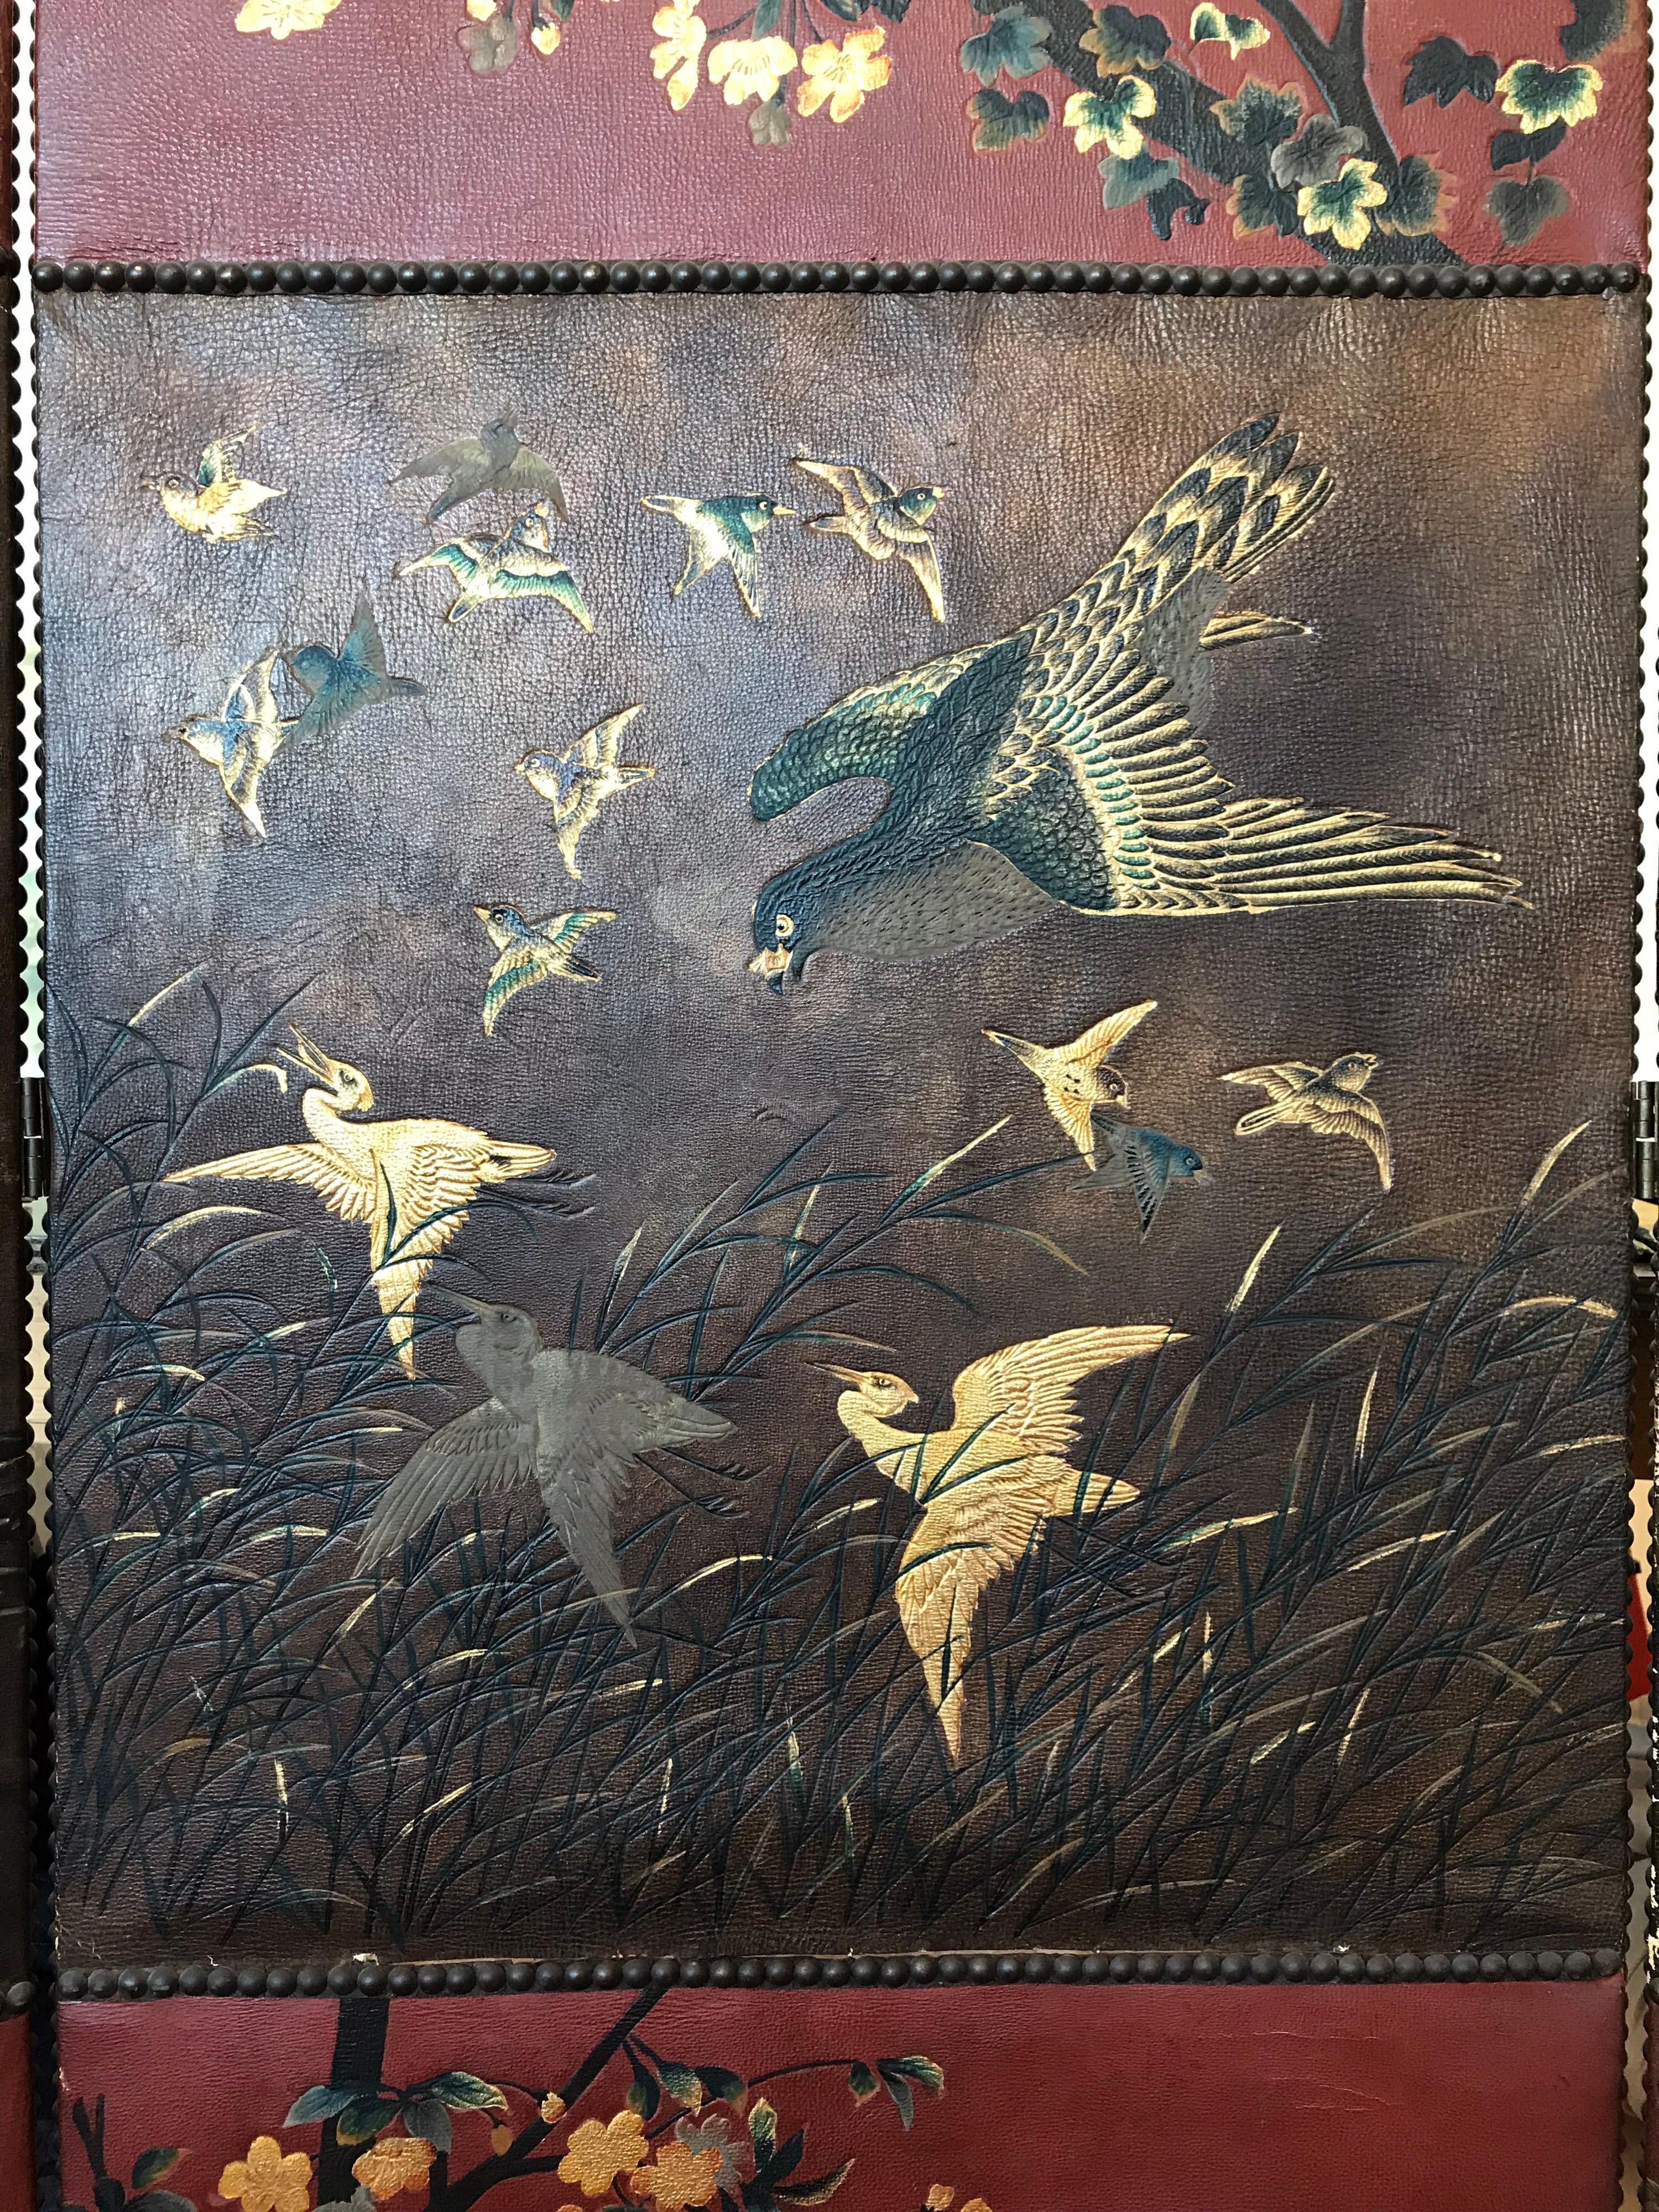 A beautiful leather three panel screen with nine separate sections of Japanese inspired designs of birds.

The back is fabric.